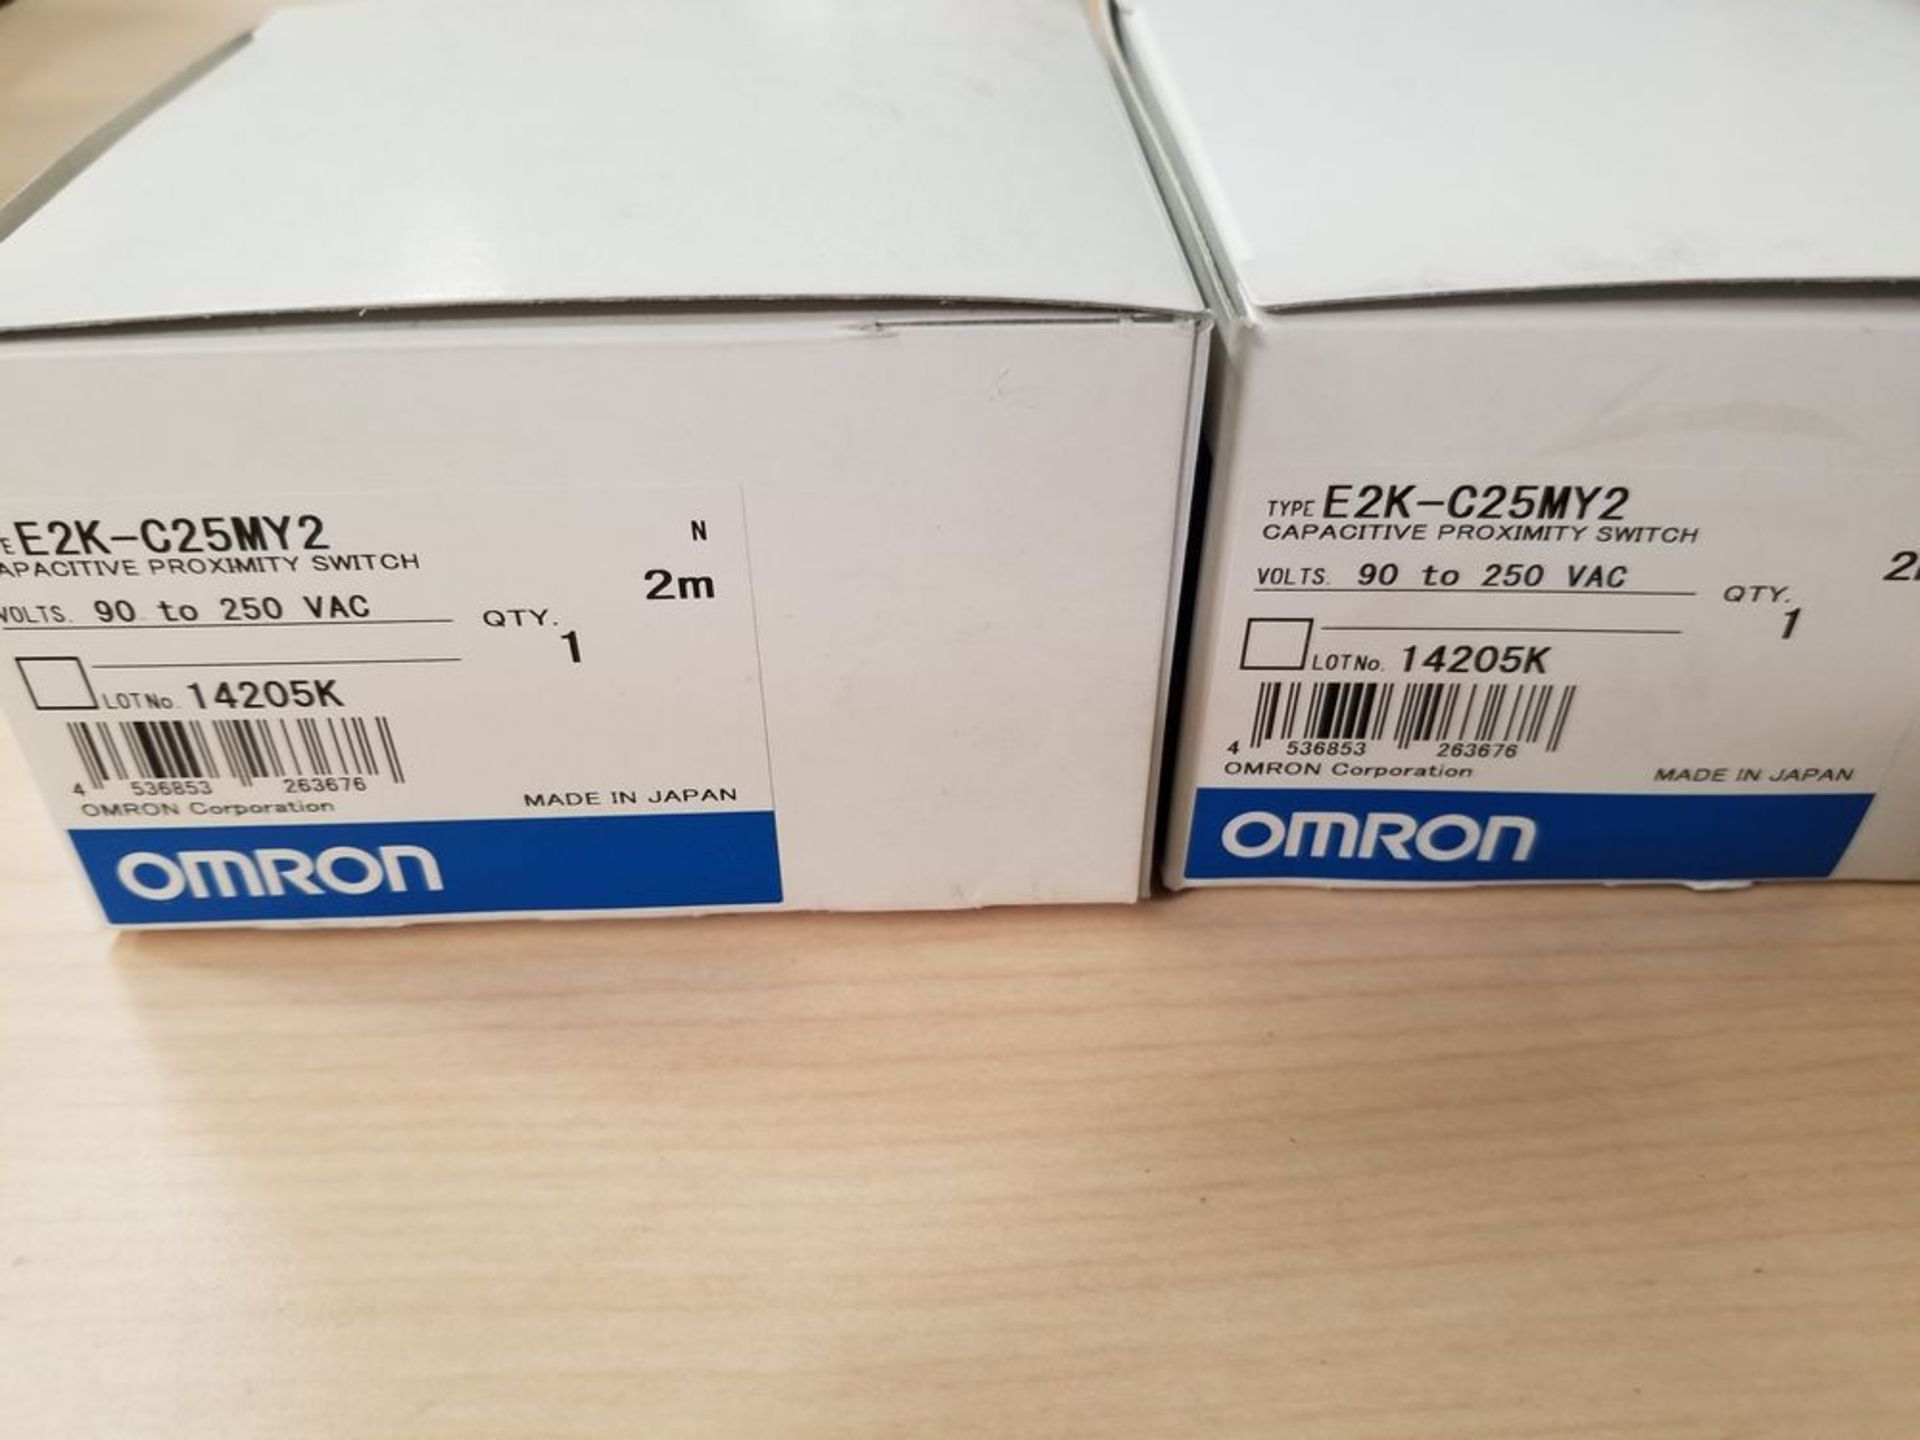 LOT OF 2 NEW OMRON E2K-C25MY2 CAPACITIVE PROXIMITY SWITCHES/SENSORS - Image 2 of 3